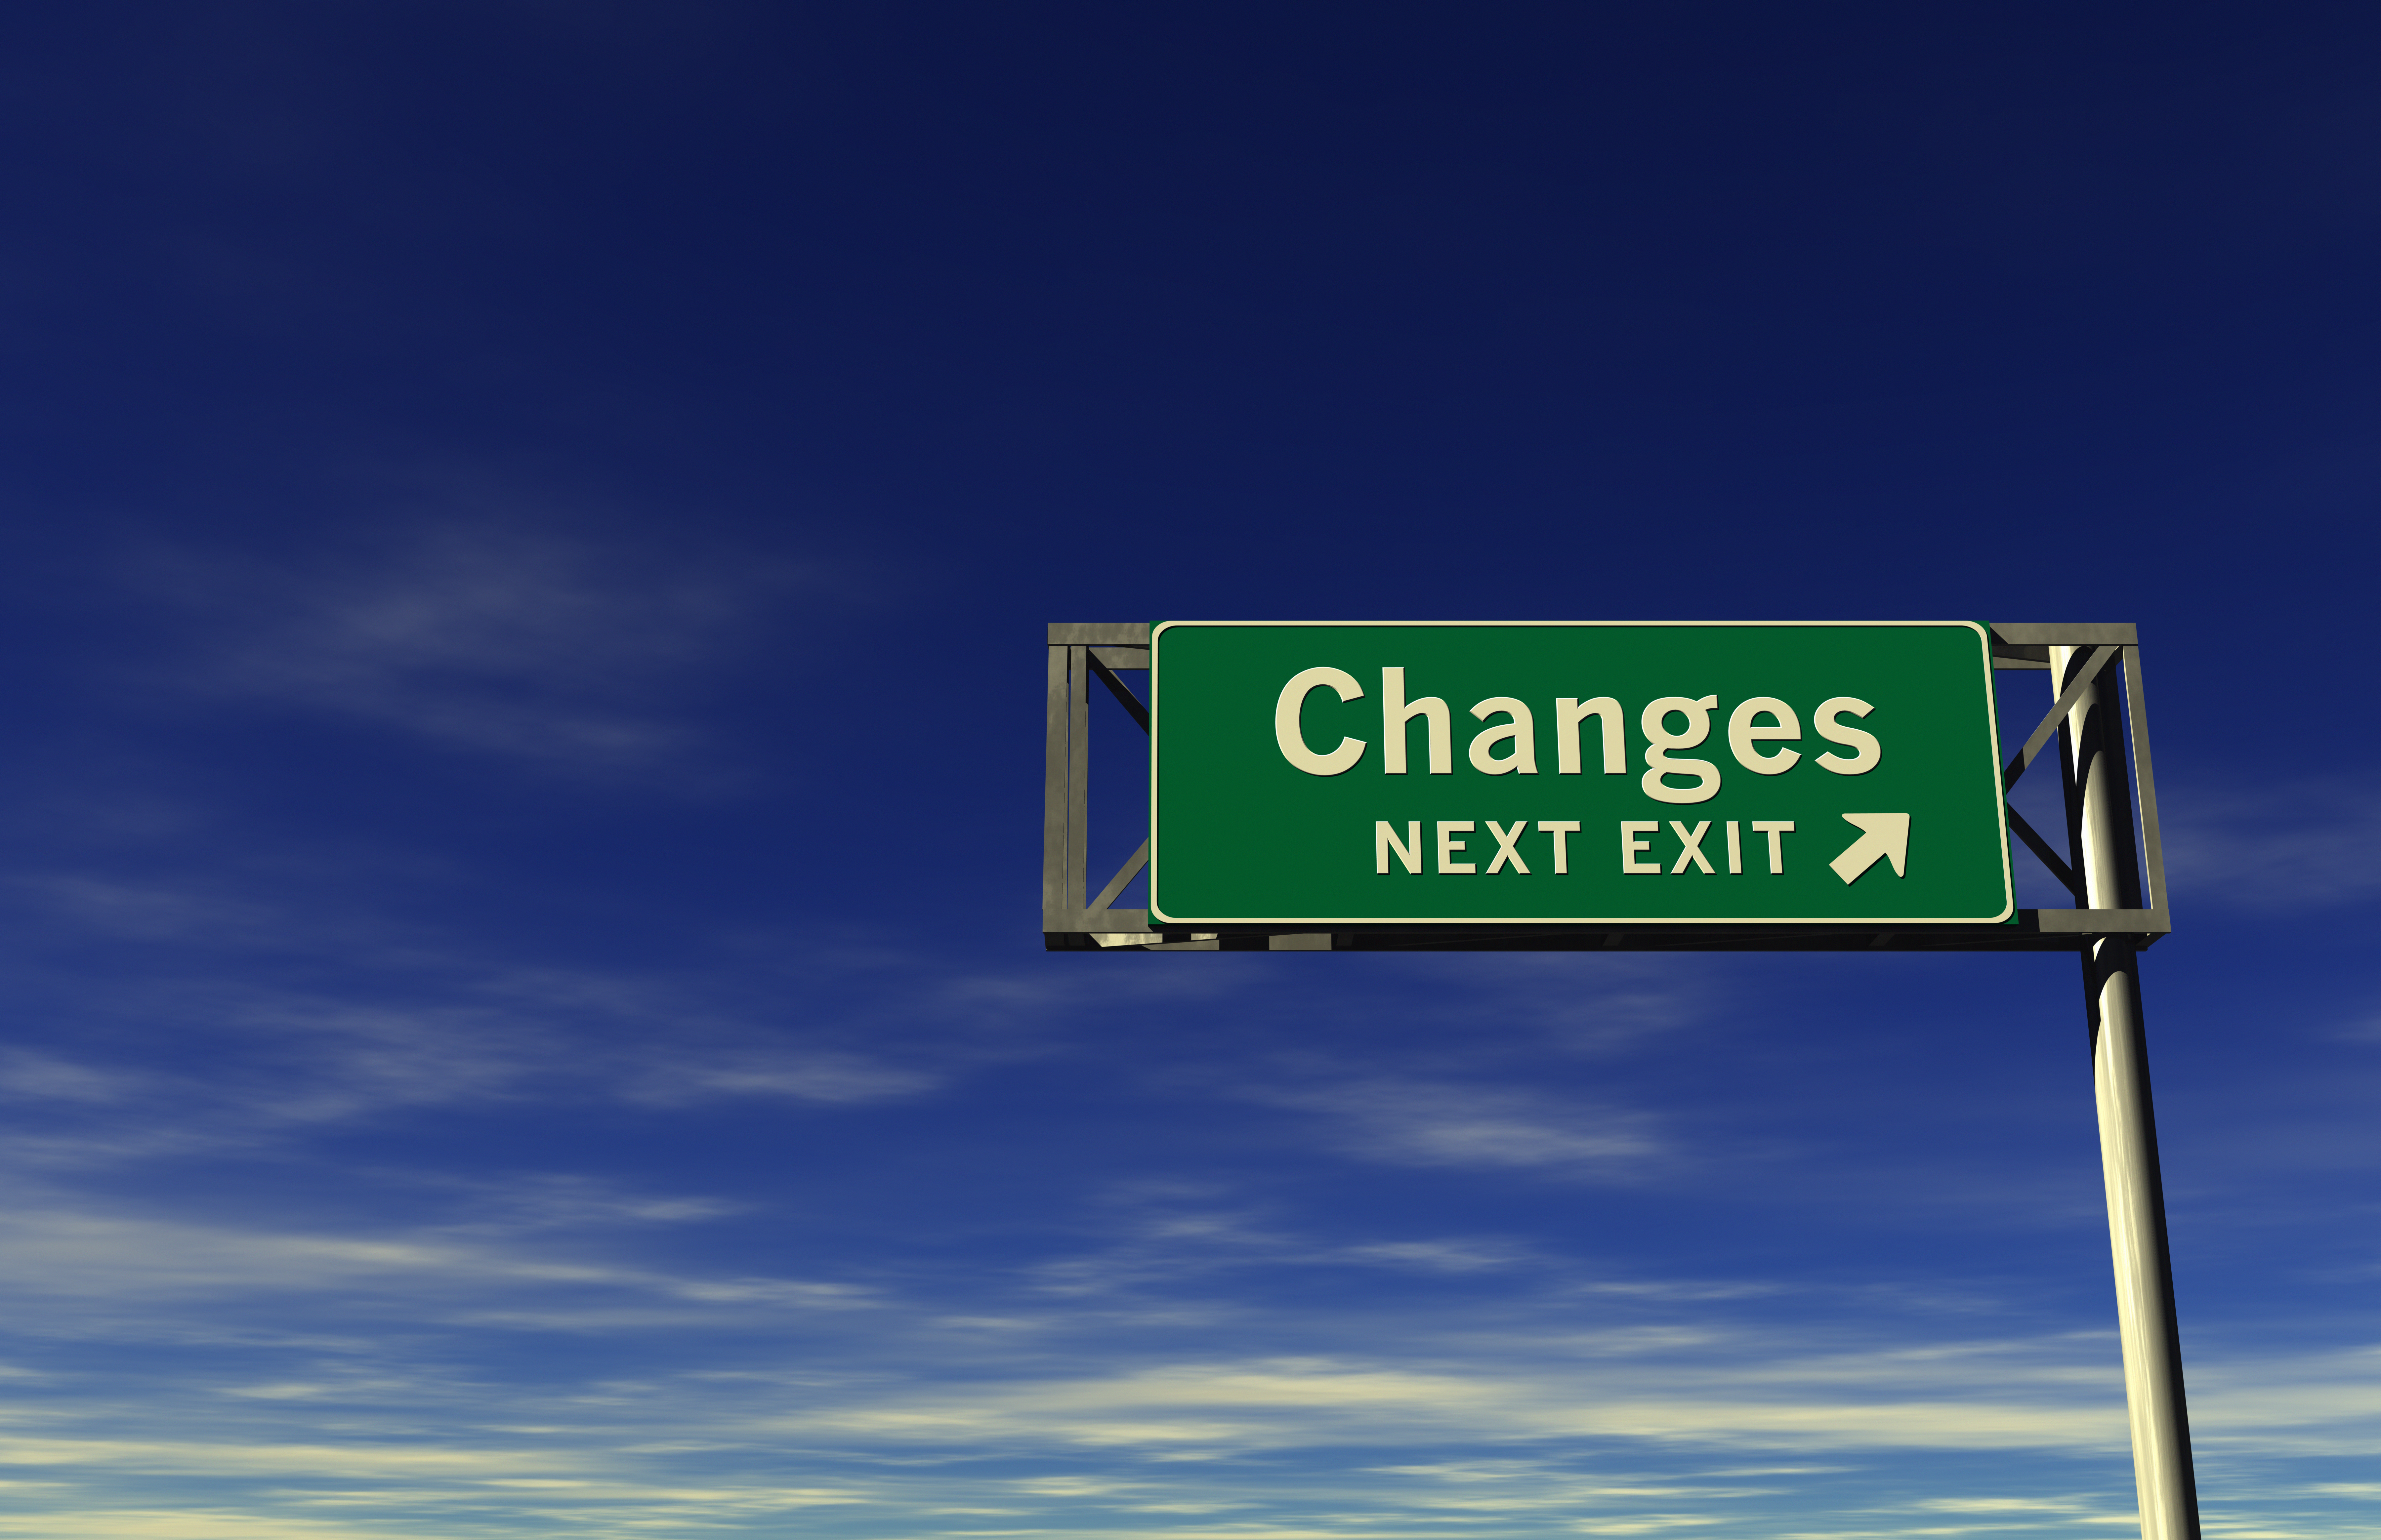 Changes Ahead - Adaptability in the Workplace